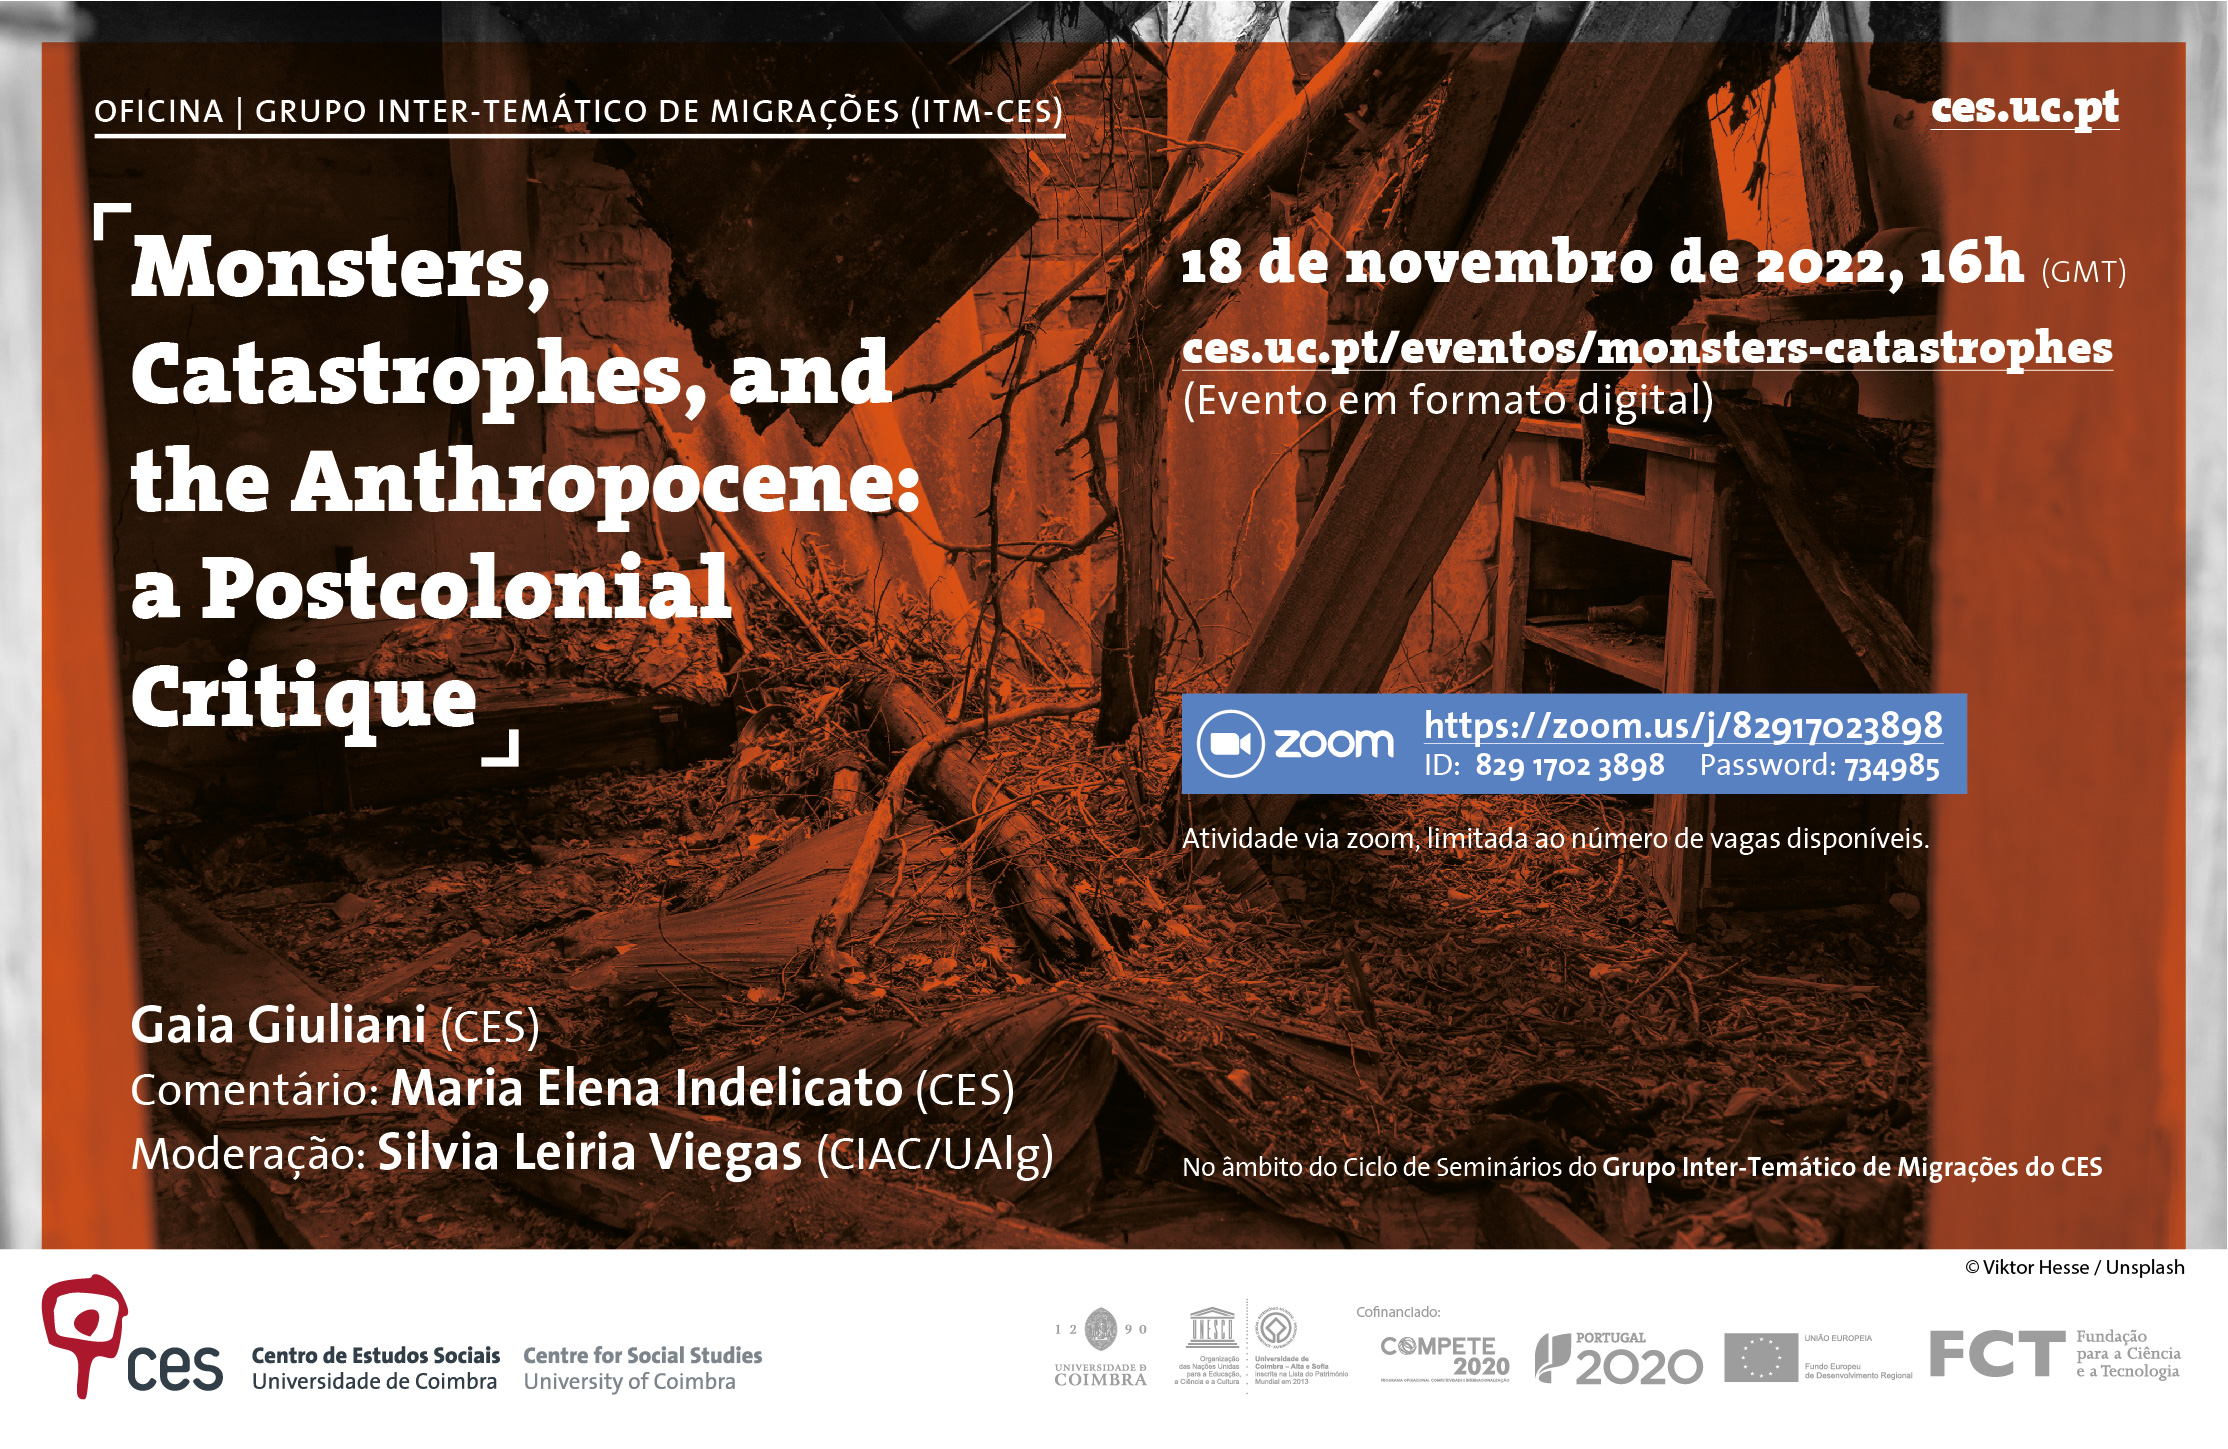 Monsters, Catastrophes, and the Anthropocene: a Postcolonial Critique<span id="edit_40740"><script>$(function() { $('#edit_40740').load( "/myces/user/editobj.php?tipo=evento&id=40740" ); });</script></span>